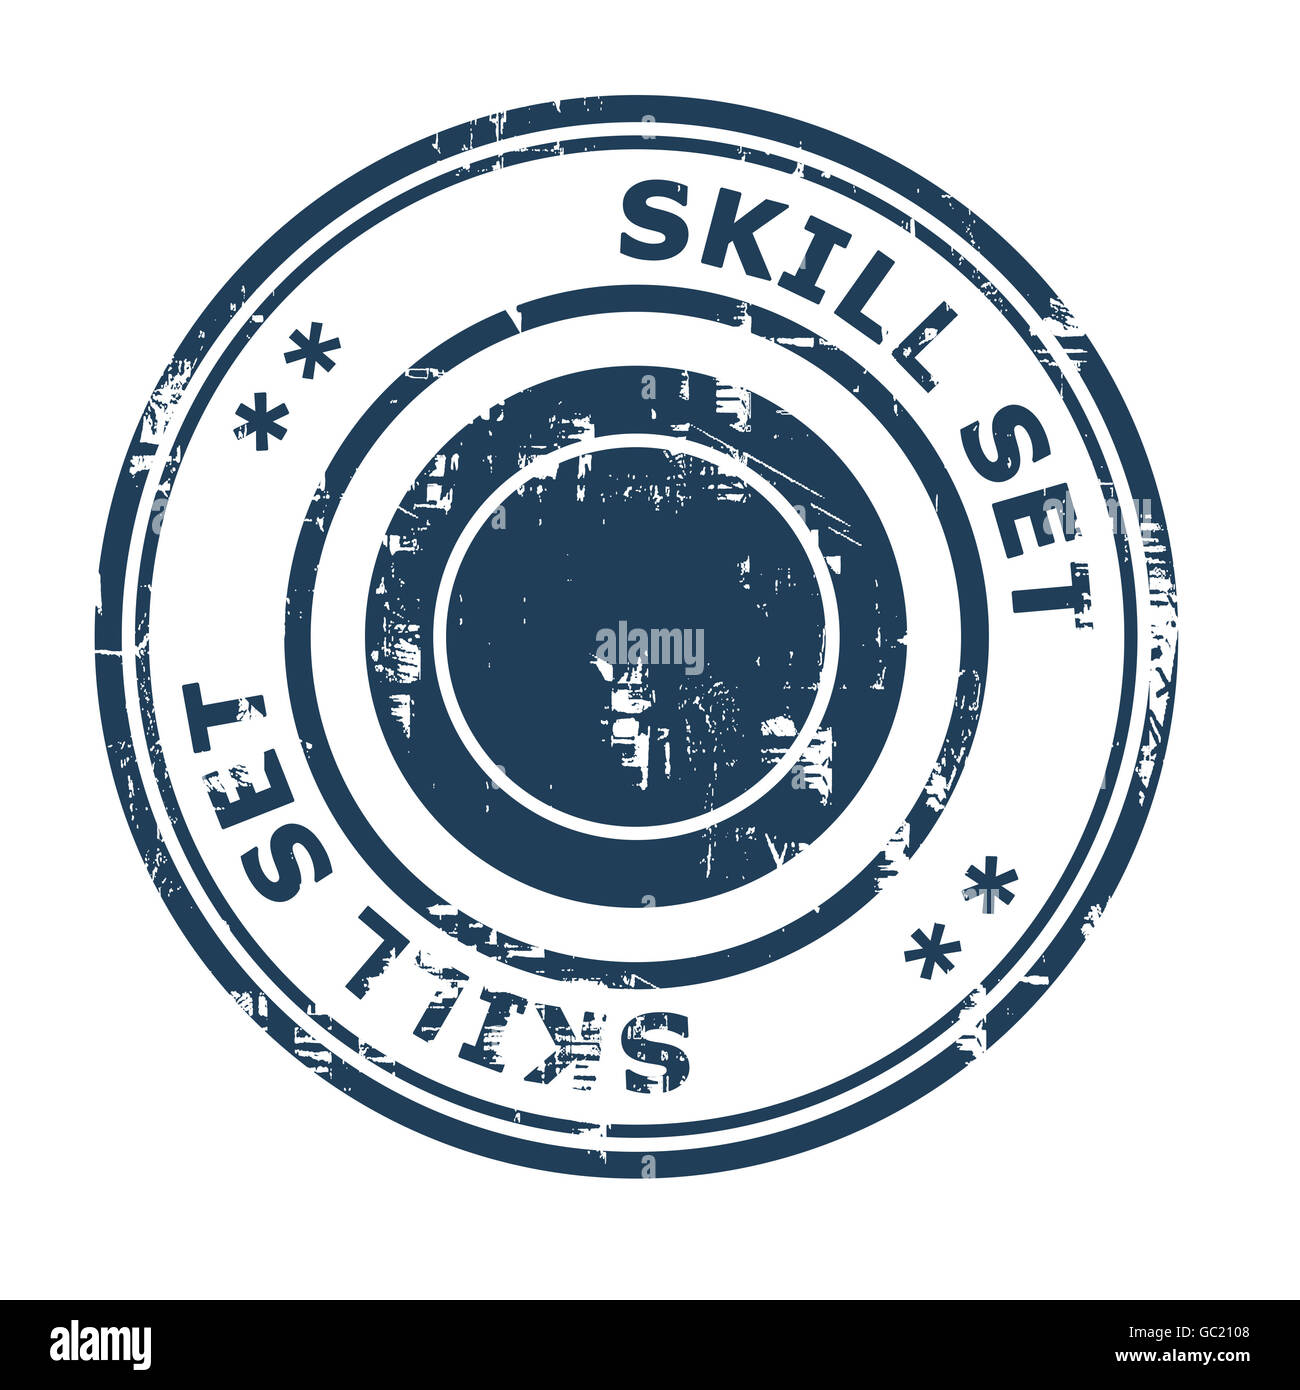 Skill set business concept rubber stamp isolated on a white background. Stock Photo